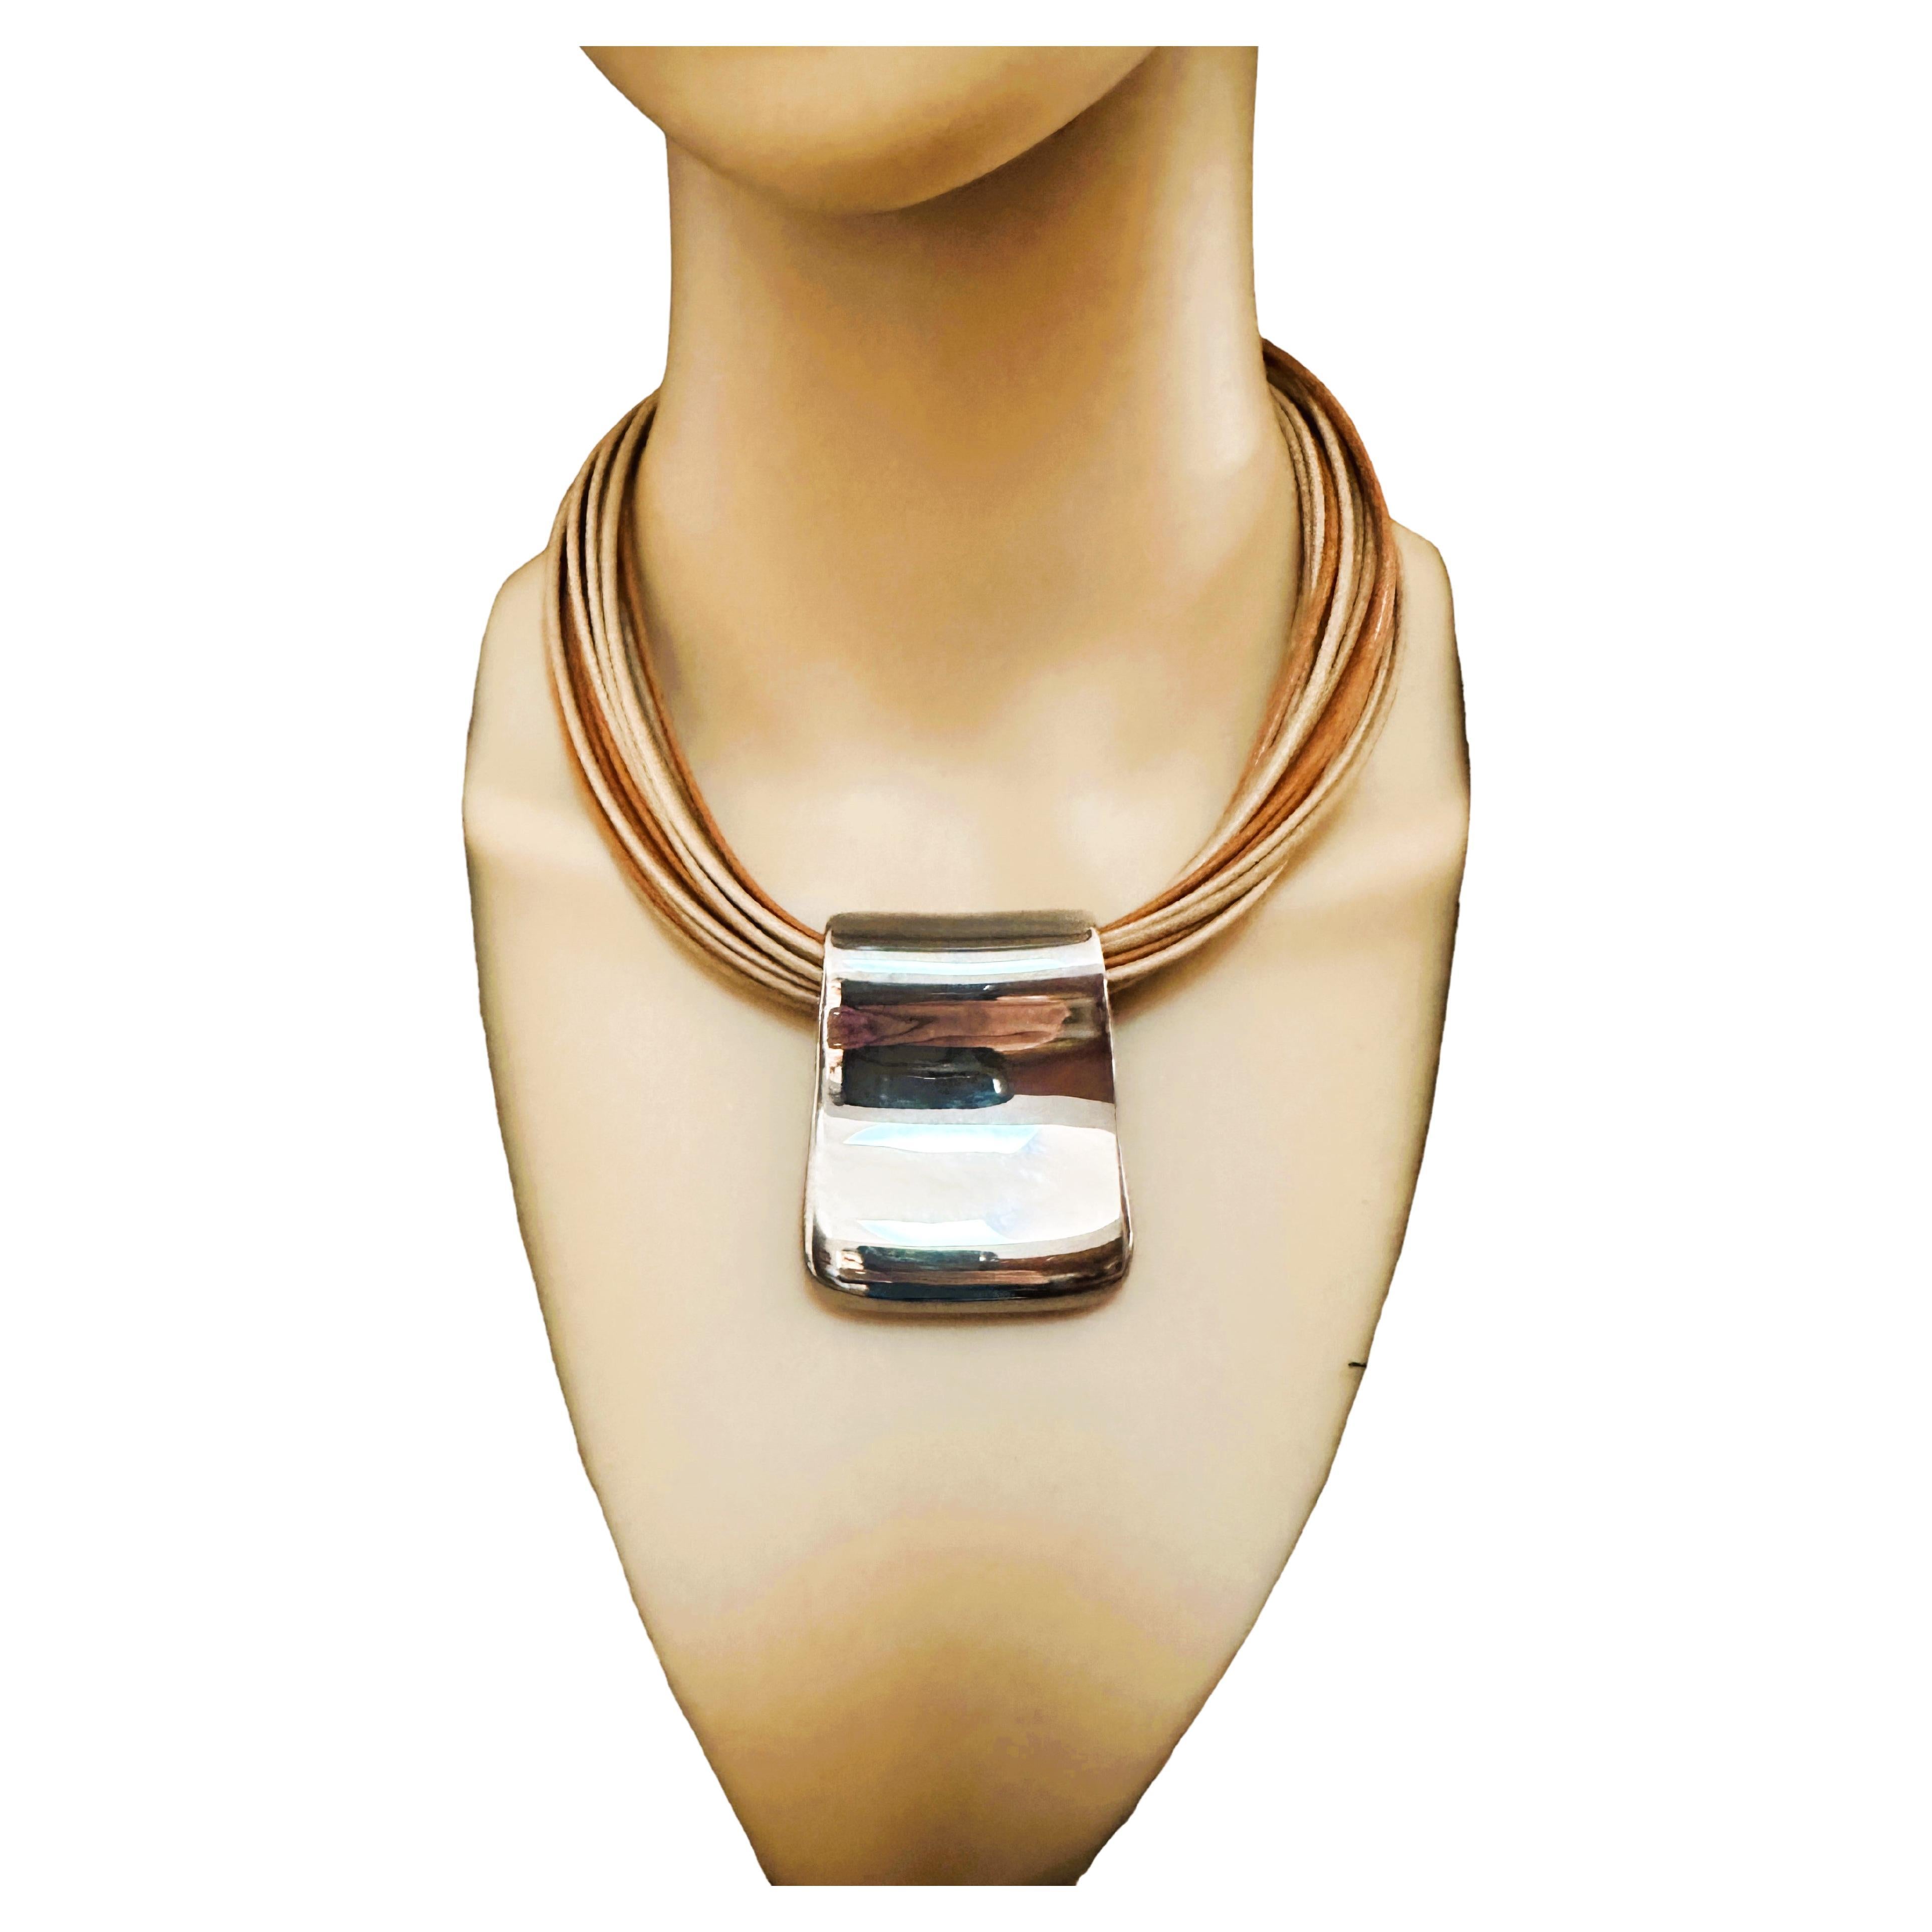 Italian Milor Italy Leather Strand Necklace with Sterling Pendant For Sale